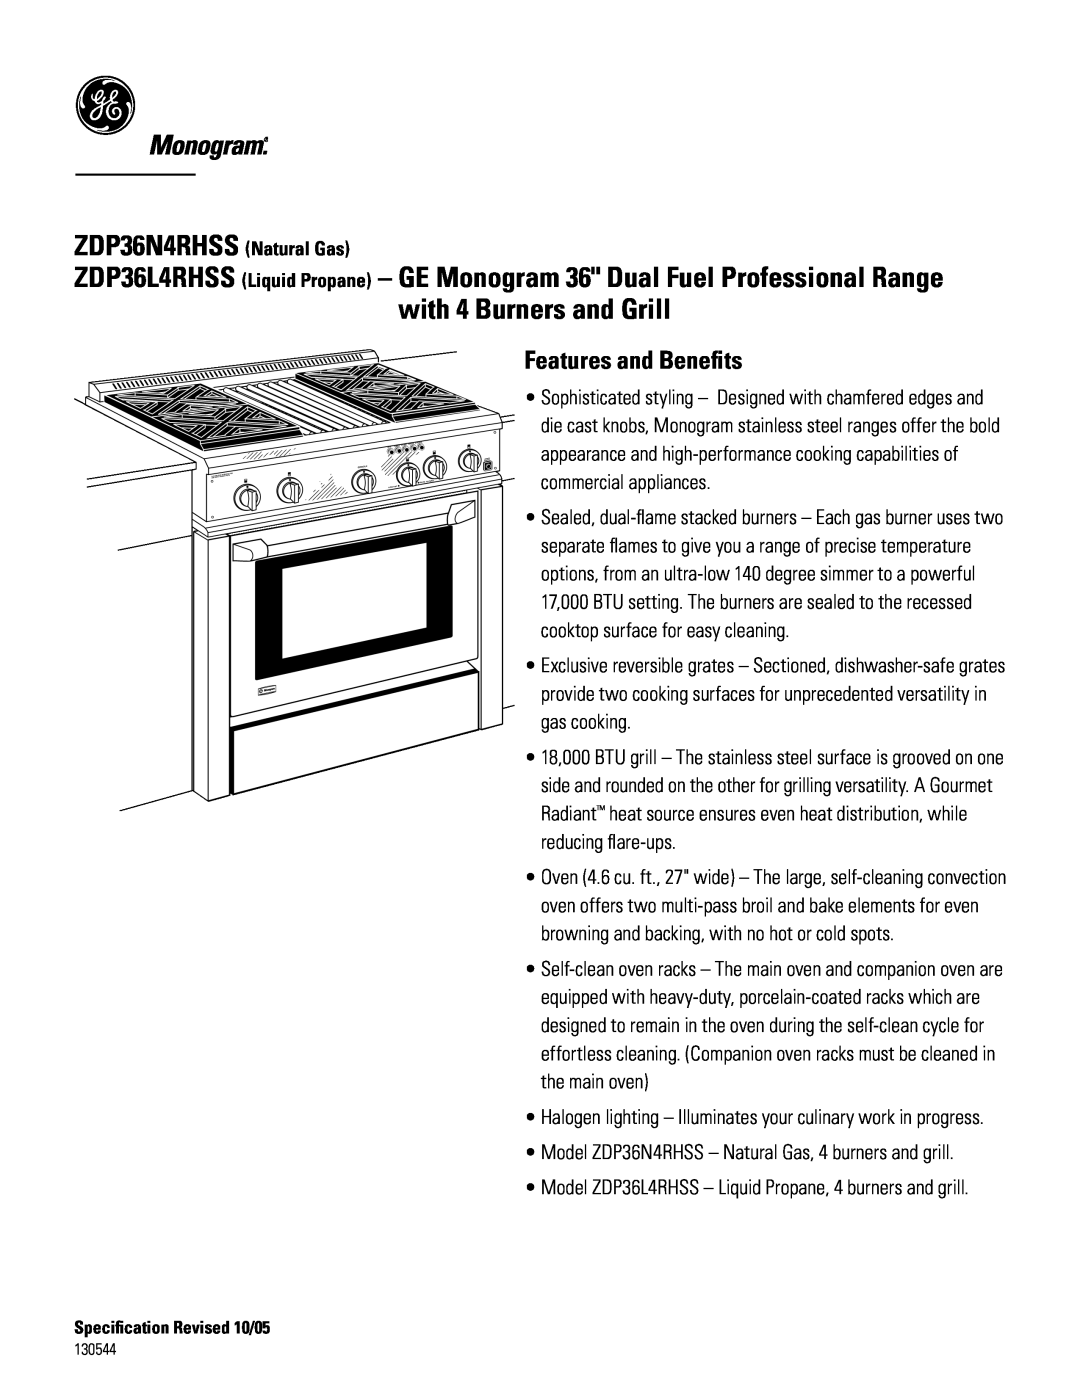 GE ZDP36L4RHSS4 GE Monogram 36 Dual Fuel Professional Range with 4 Burners and Grill, Features and Beneﬁts, ZDP36N4RHSS 